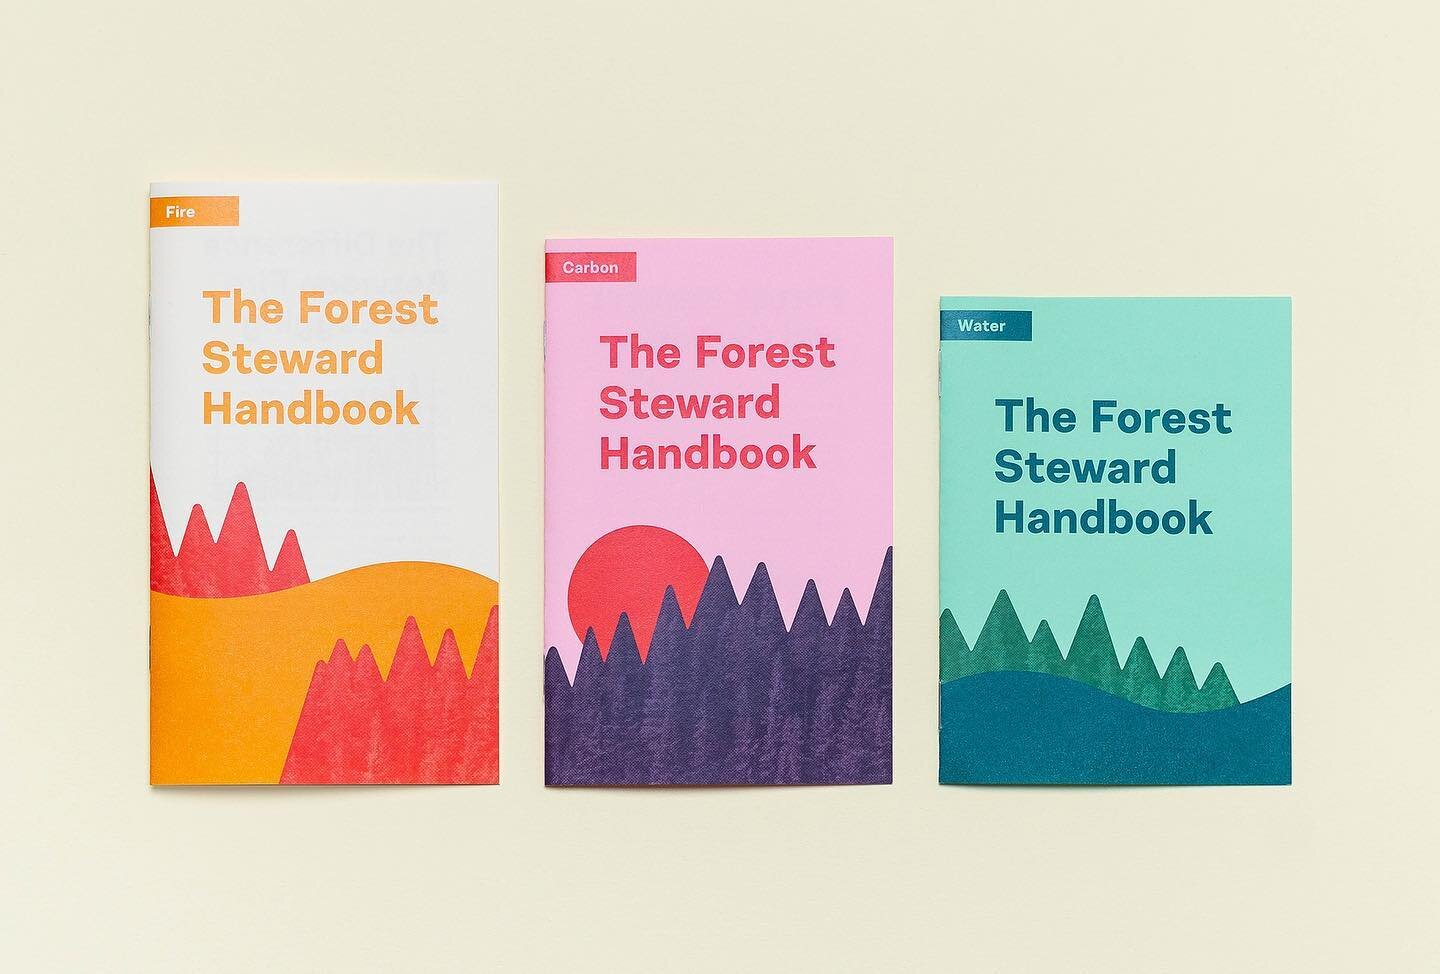 We made forest stuff easy to understand by breaking things down into fun infographics. We worked with the @cpawssab team to ensure the content was accessible while still staying true to the facts.